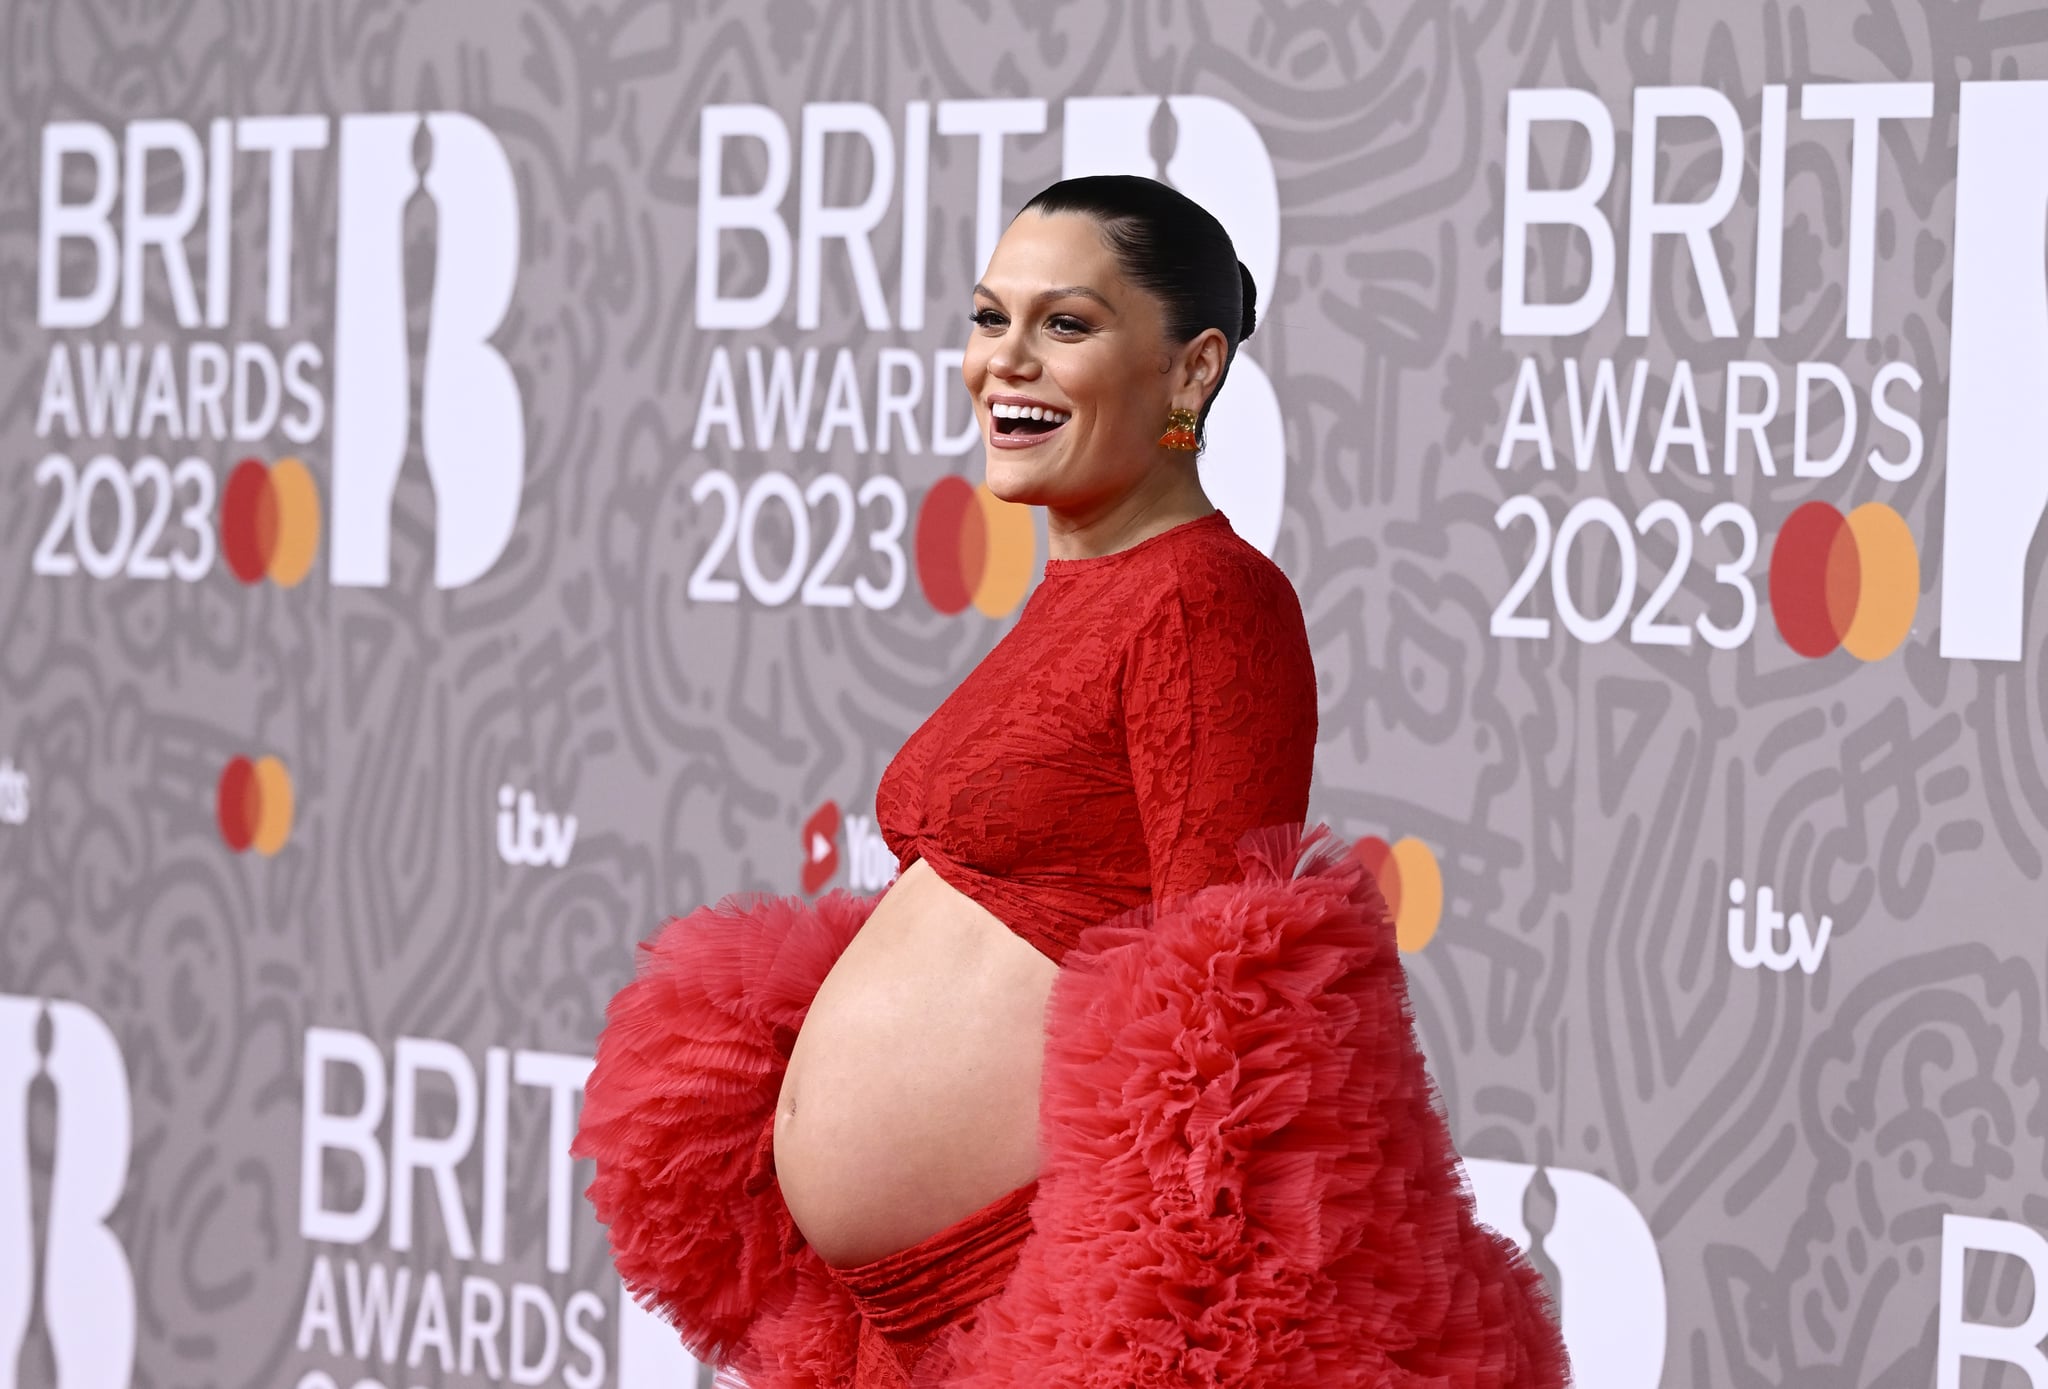 LONDON, ENGLAND - FEBRUARY 11: EDITORIAL USE ONLY: Jessie J attends The BRIT Awards 2023  at The O2 Arena on February 11, 2023 in London, England. (Photo by Gareth Cattermole/Gareth Cattermole/Getty Images)